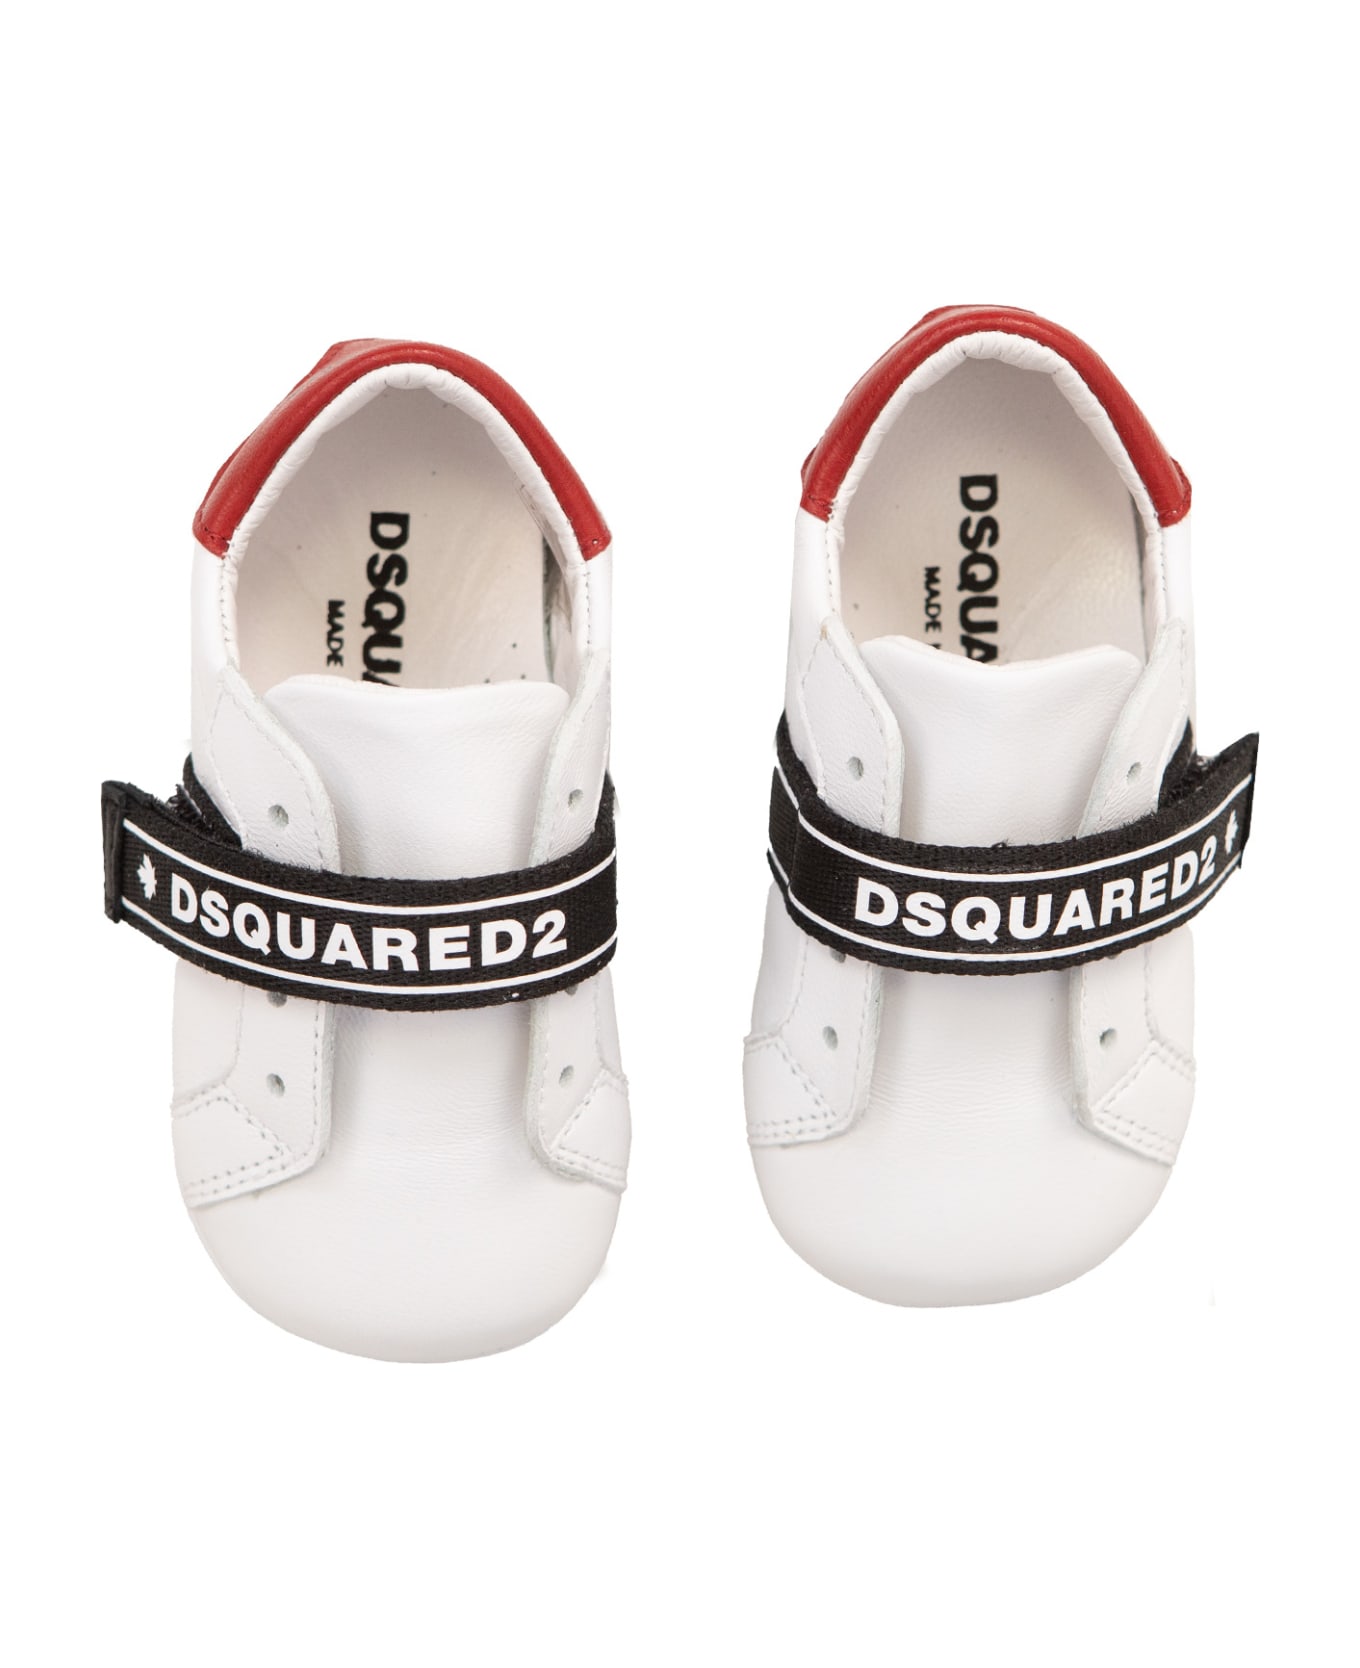 Dsquared2 First Steps Shoes - White シューズ